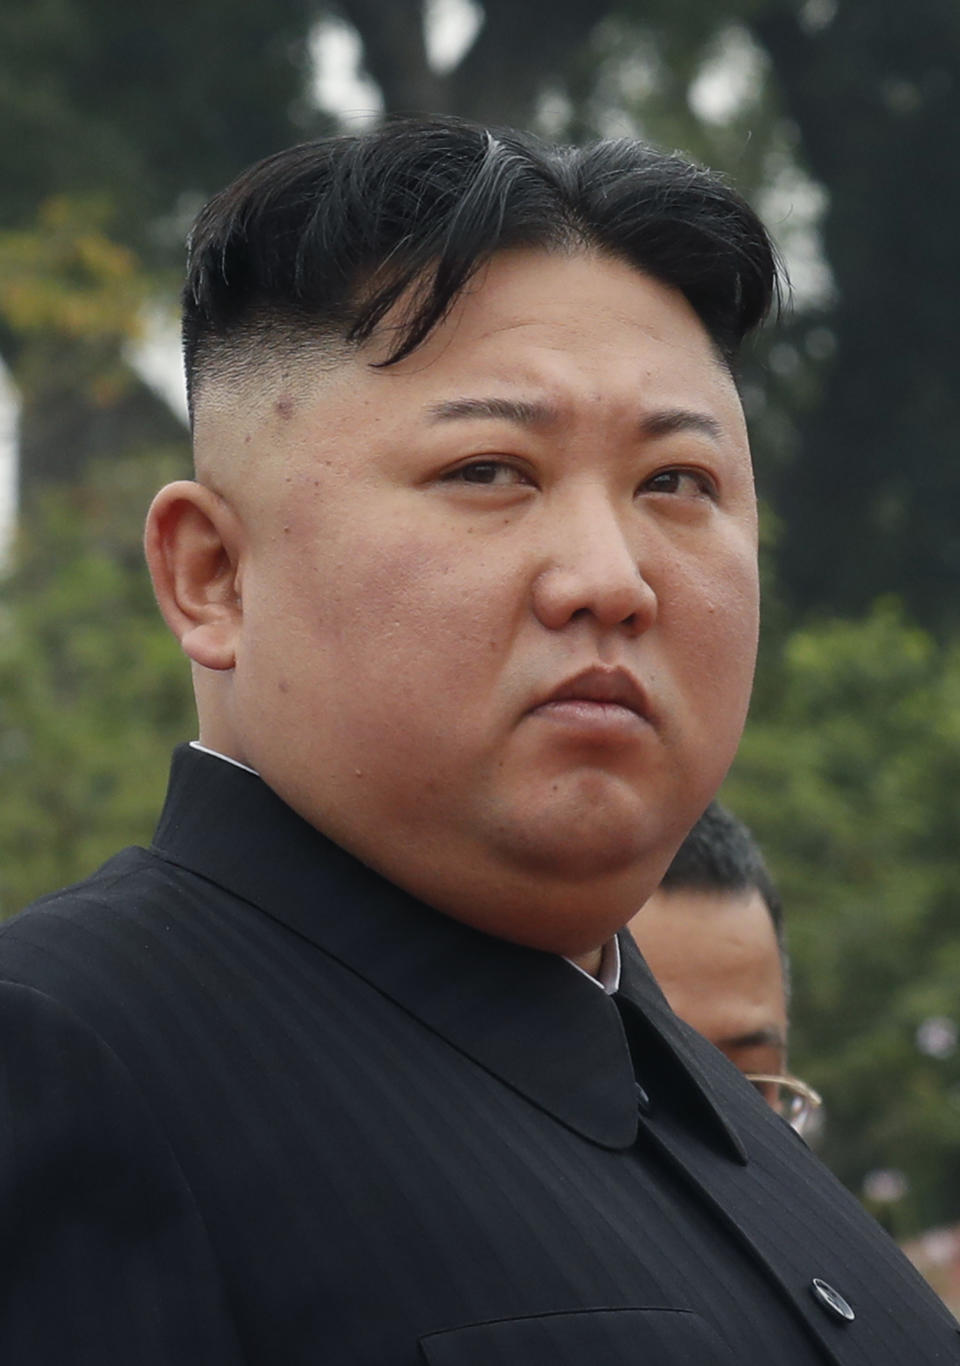 North Korean leader Kim Jong Un attends a wreath laying ceremony at Monument to War Heroes and Martyrs in Hanoi, Vietnam Saturday, March 2, 2019. (Kham/Pool Photo via AP)